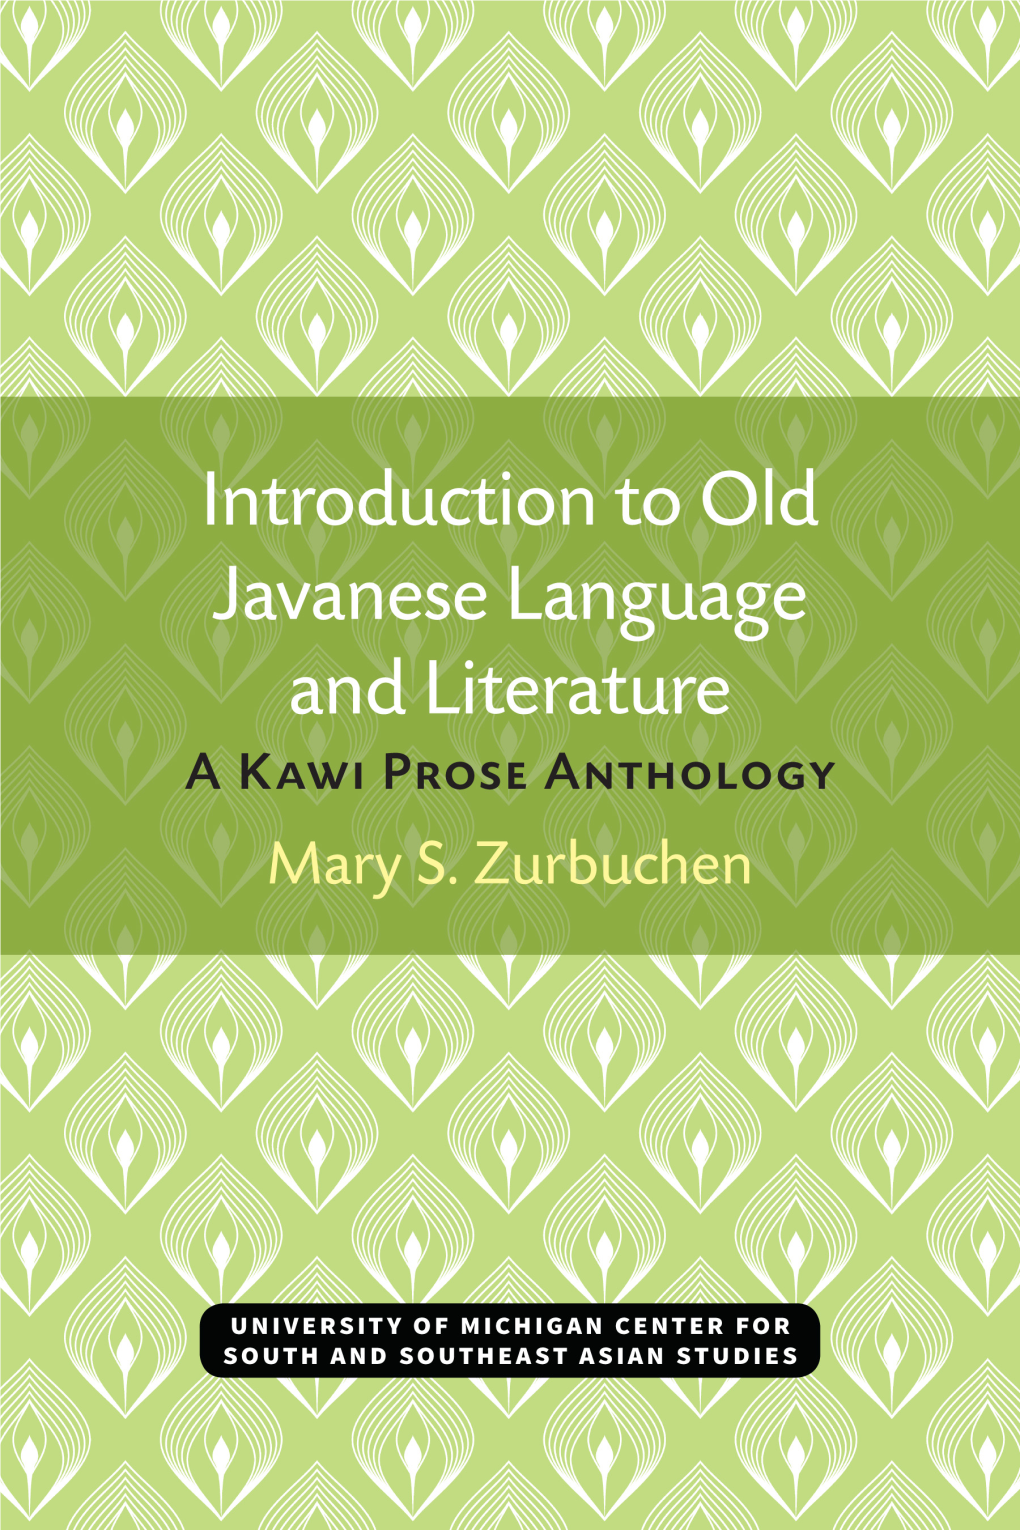 Introduction to Old Javanese Language and Literature: a Kawi Prose Anthology